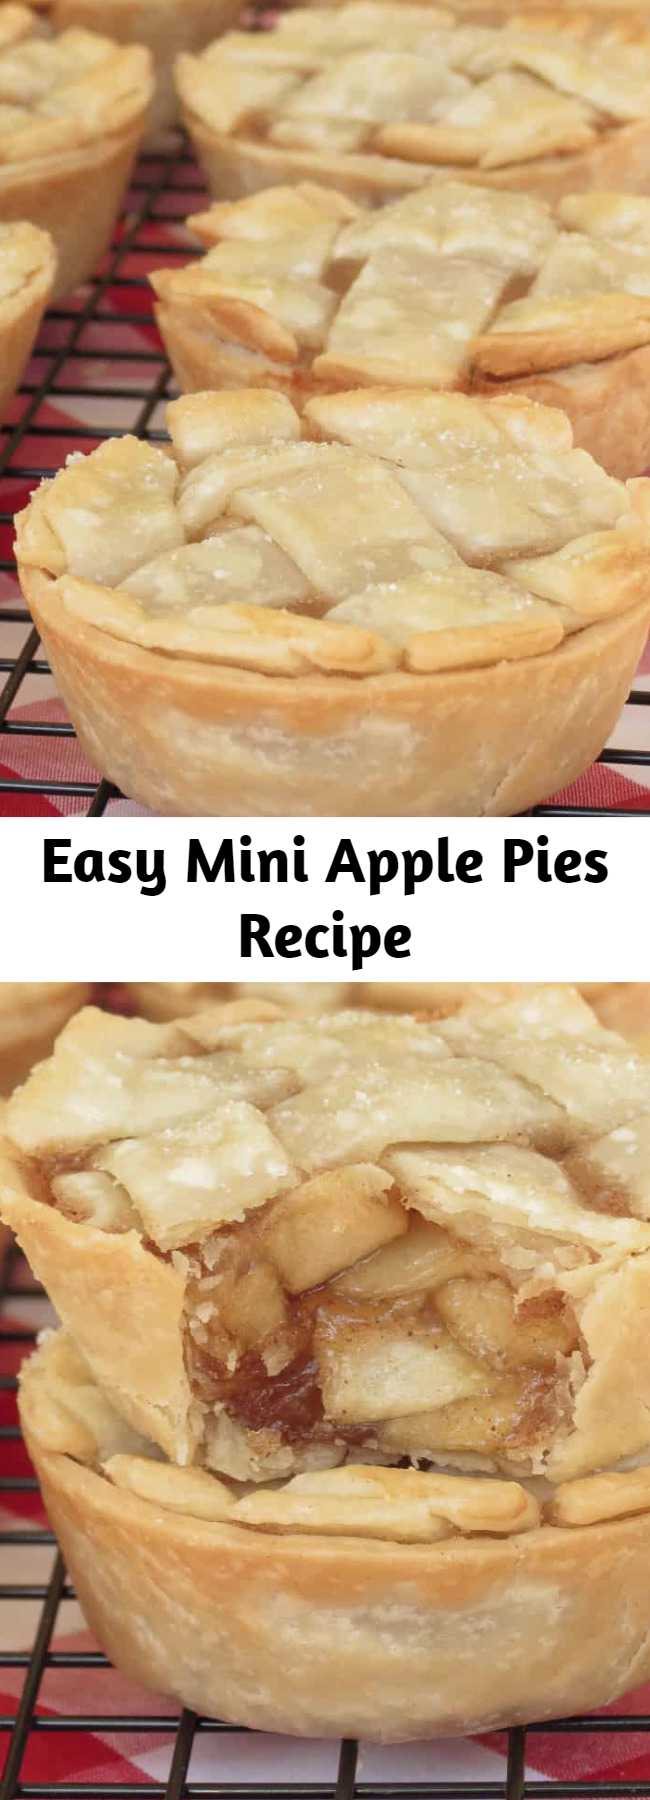 Easy Mini Apple Pies Recipe - These adorable little pies are super easy to make and the filling is so delicious, everyone will love them!